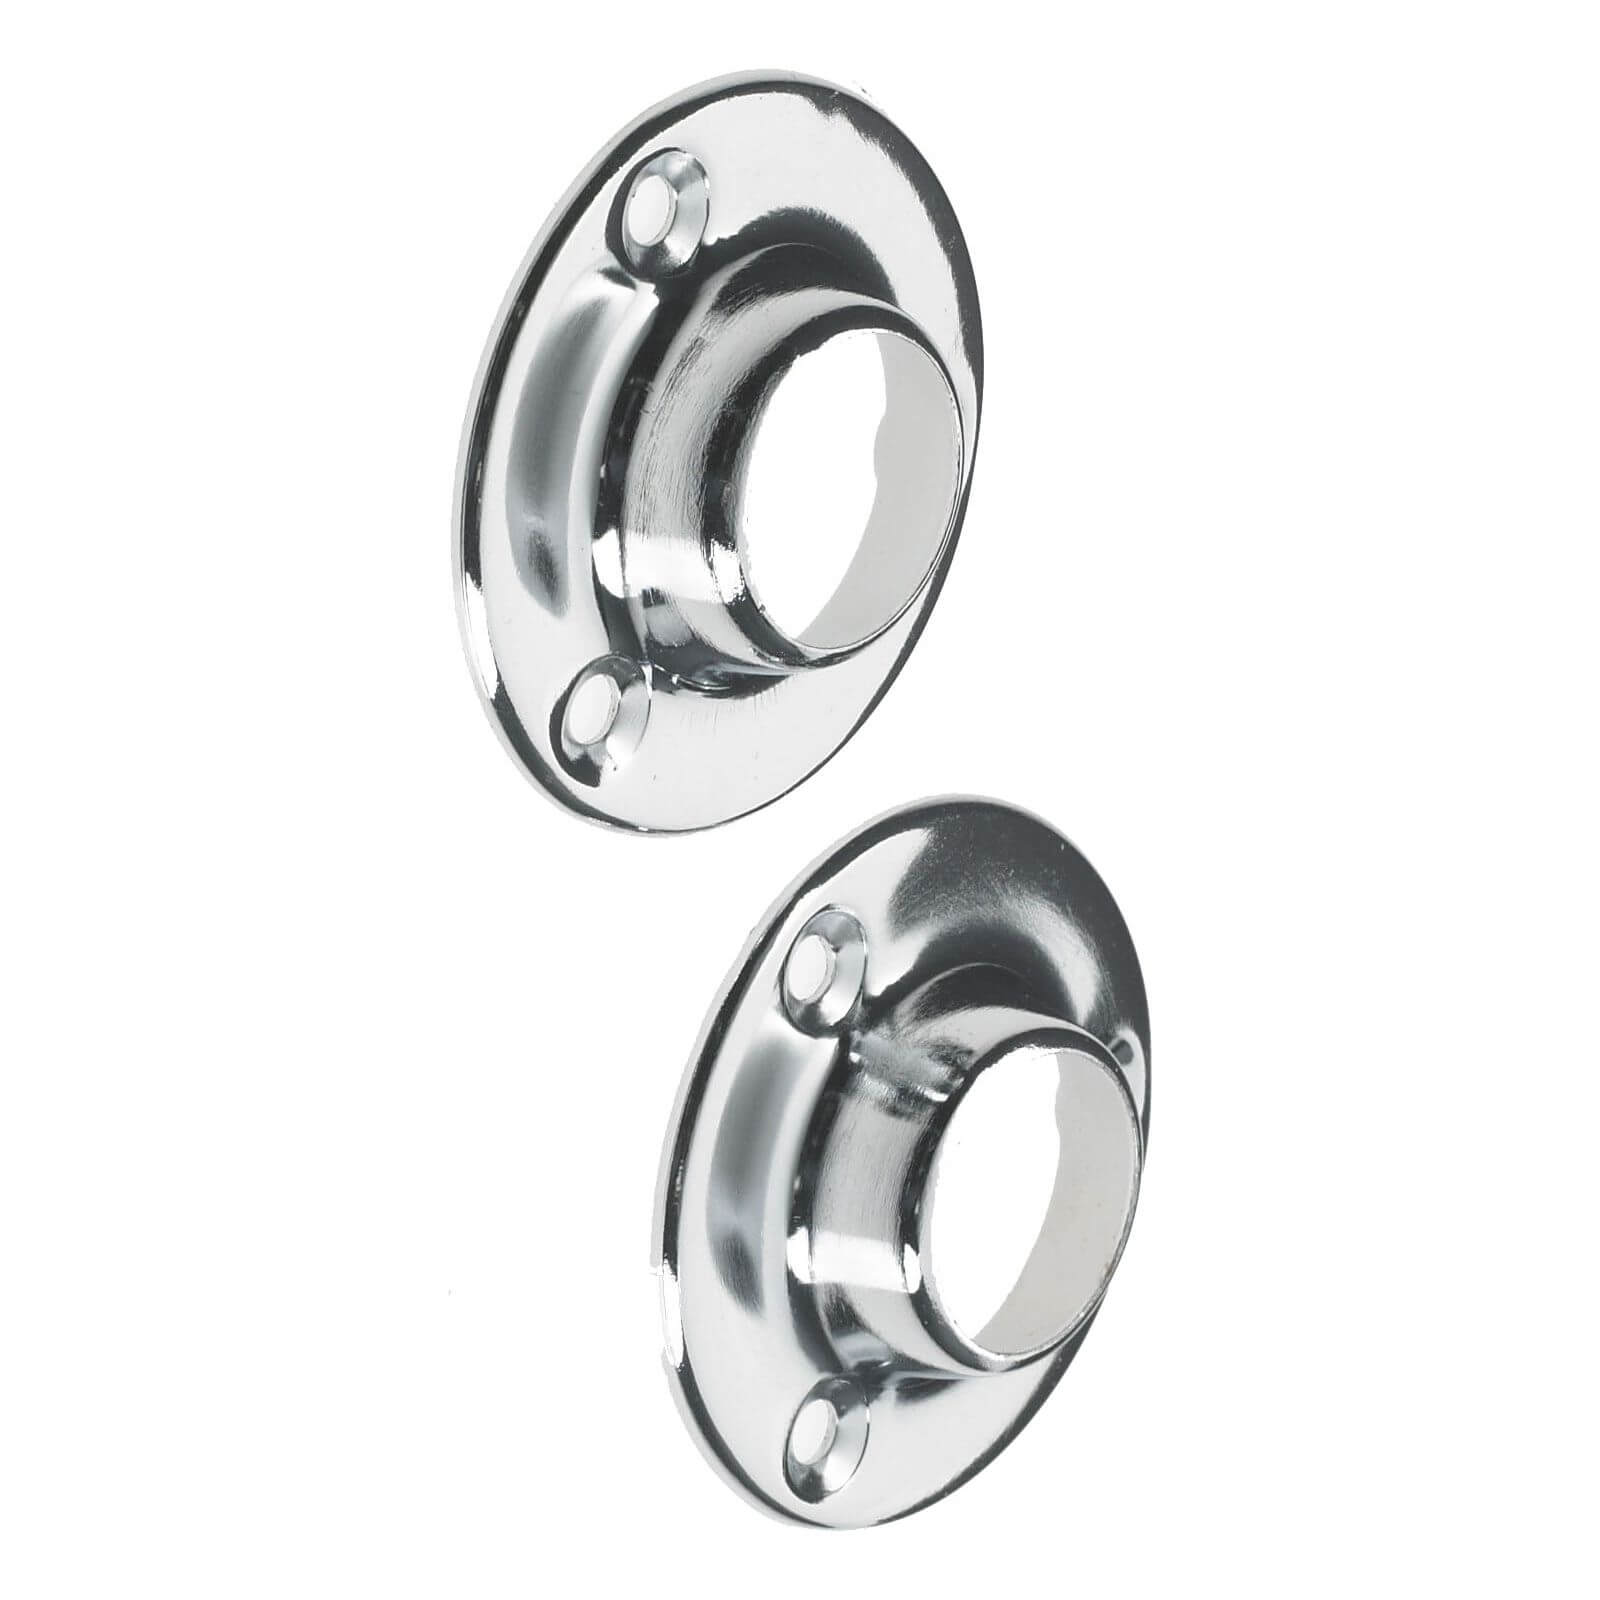 Photo of Deluxe Sockets - Chrome Plated - 19mm